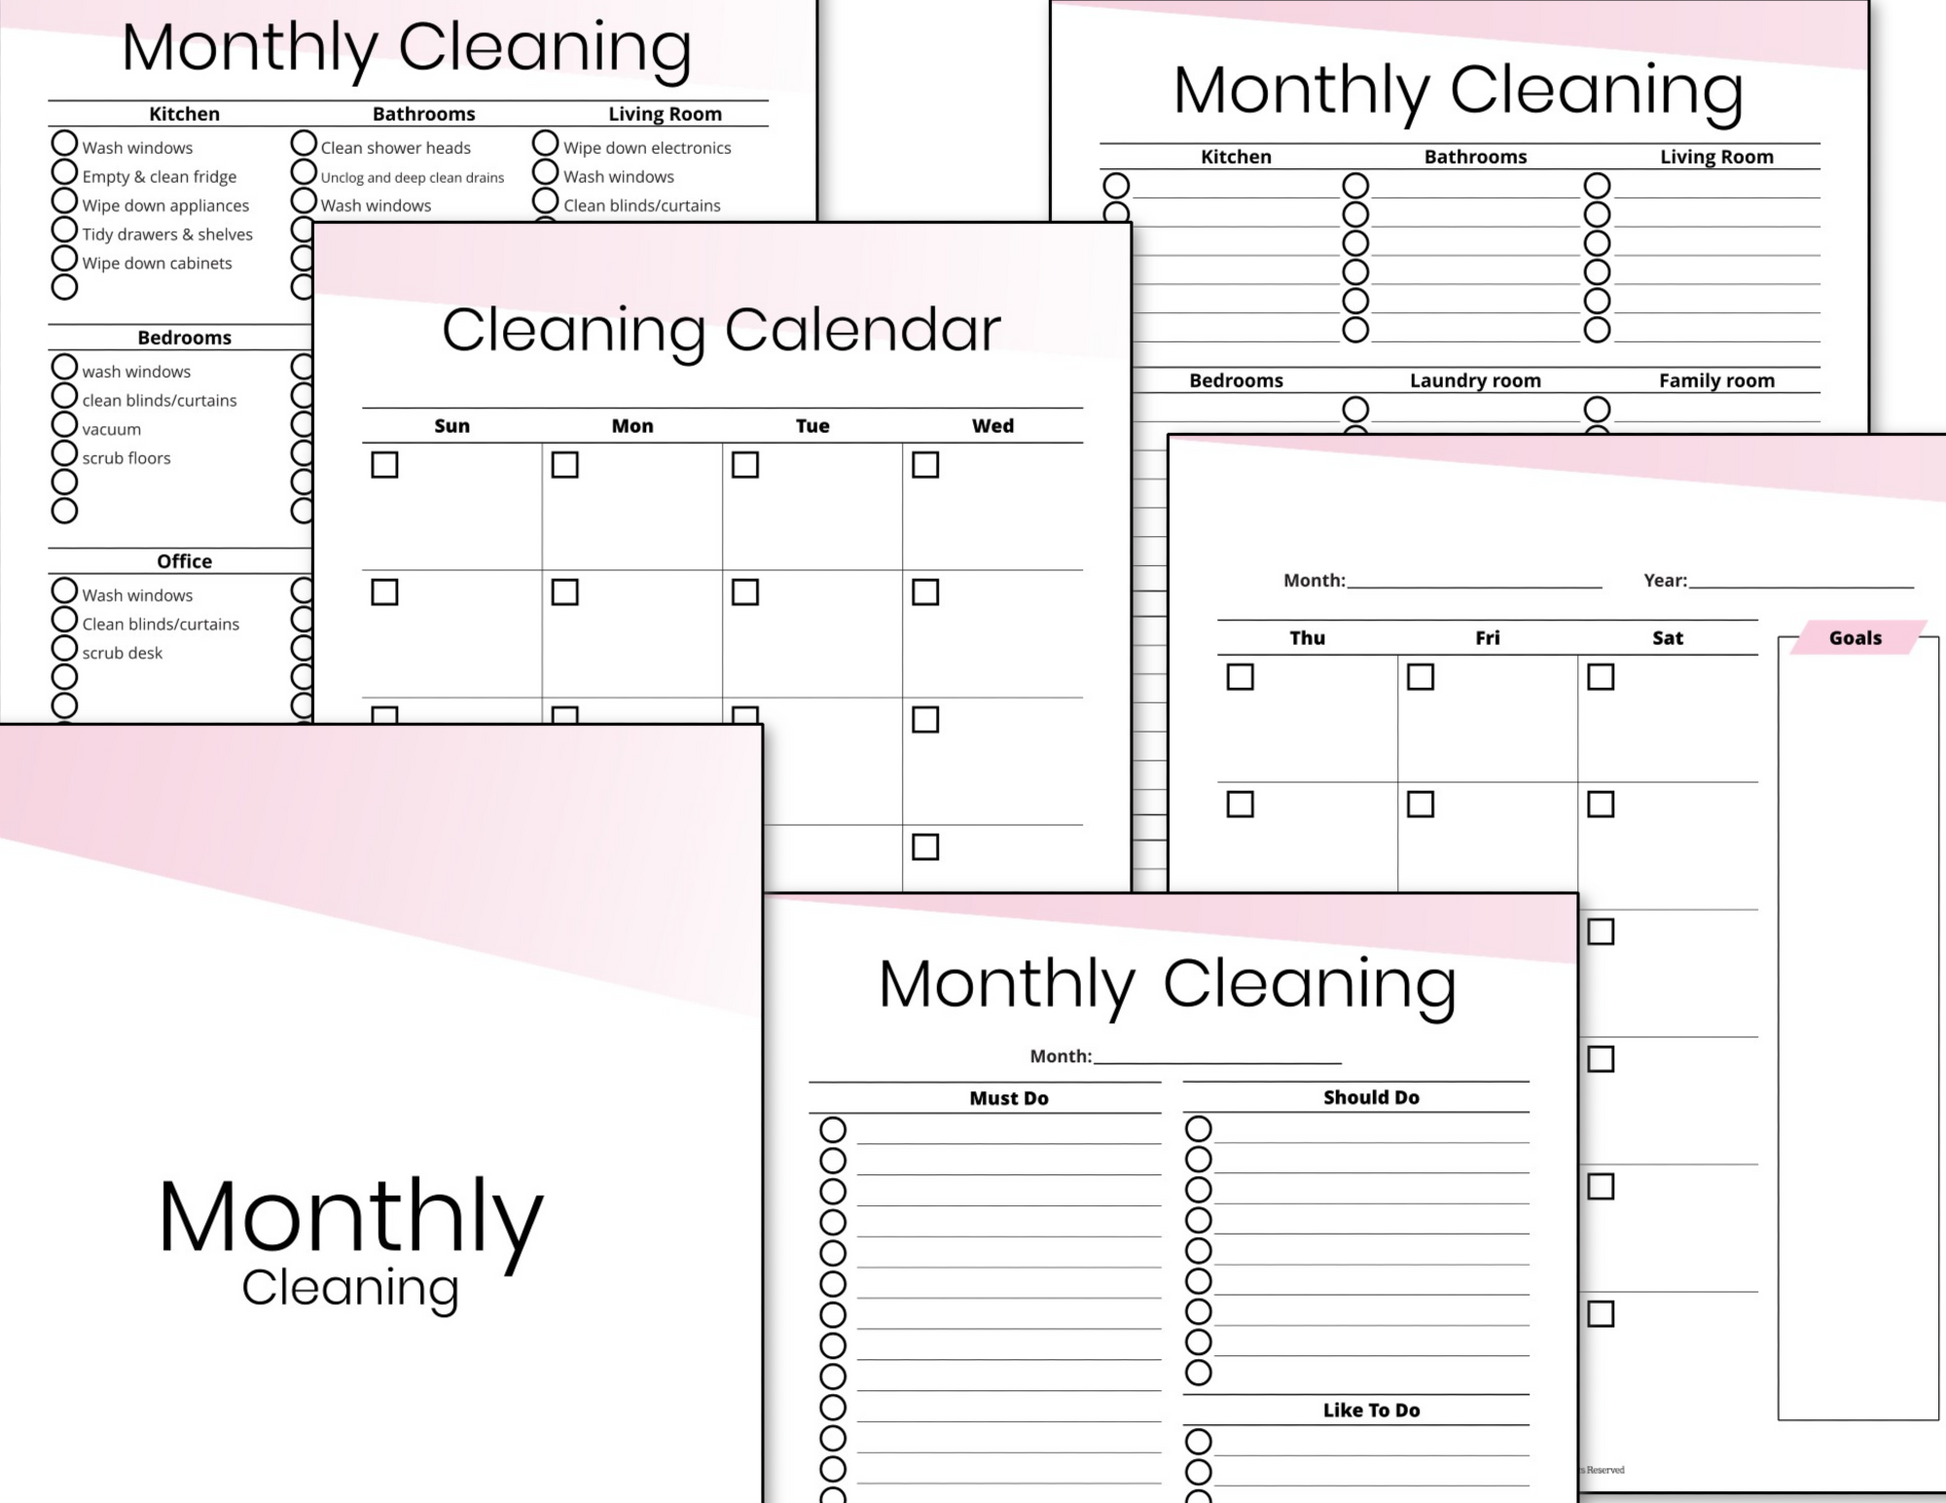 A collection of printable monthly cleaning schedule templates, including the Organized 31 Shop Cleaning Binder Fillable - Pink and checklist, with various layouts for organizing cleaning tasks.